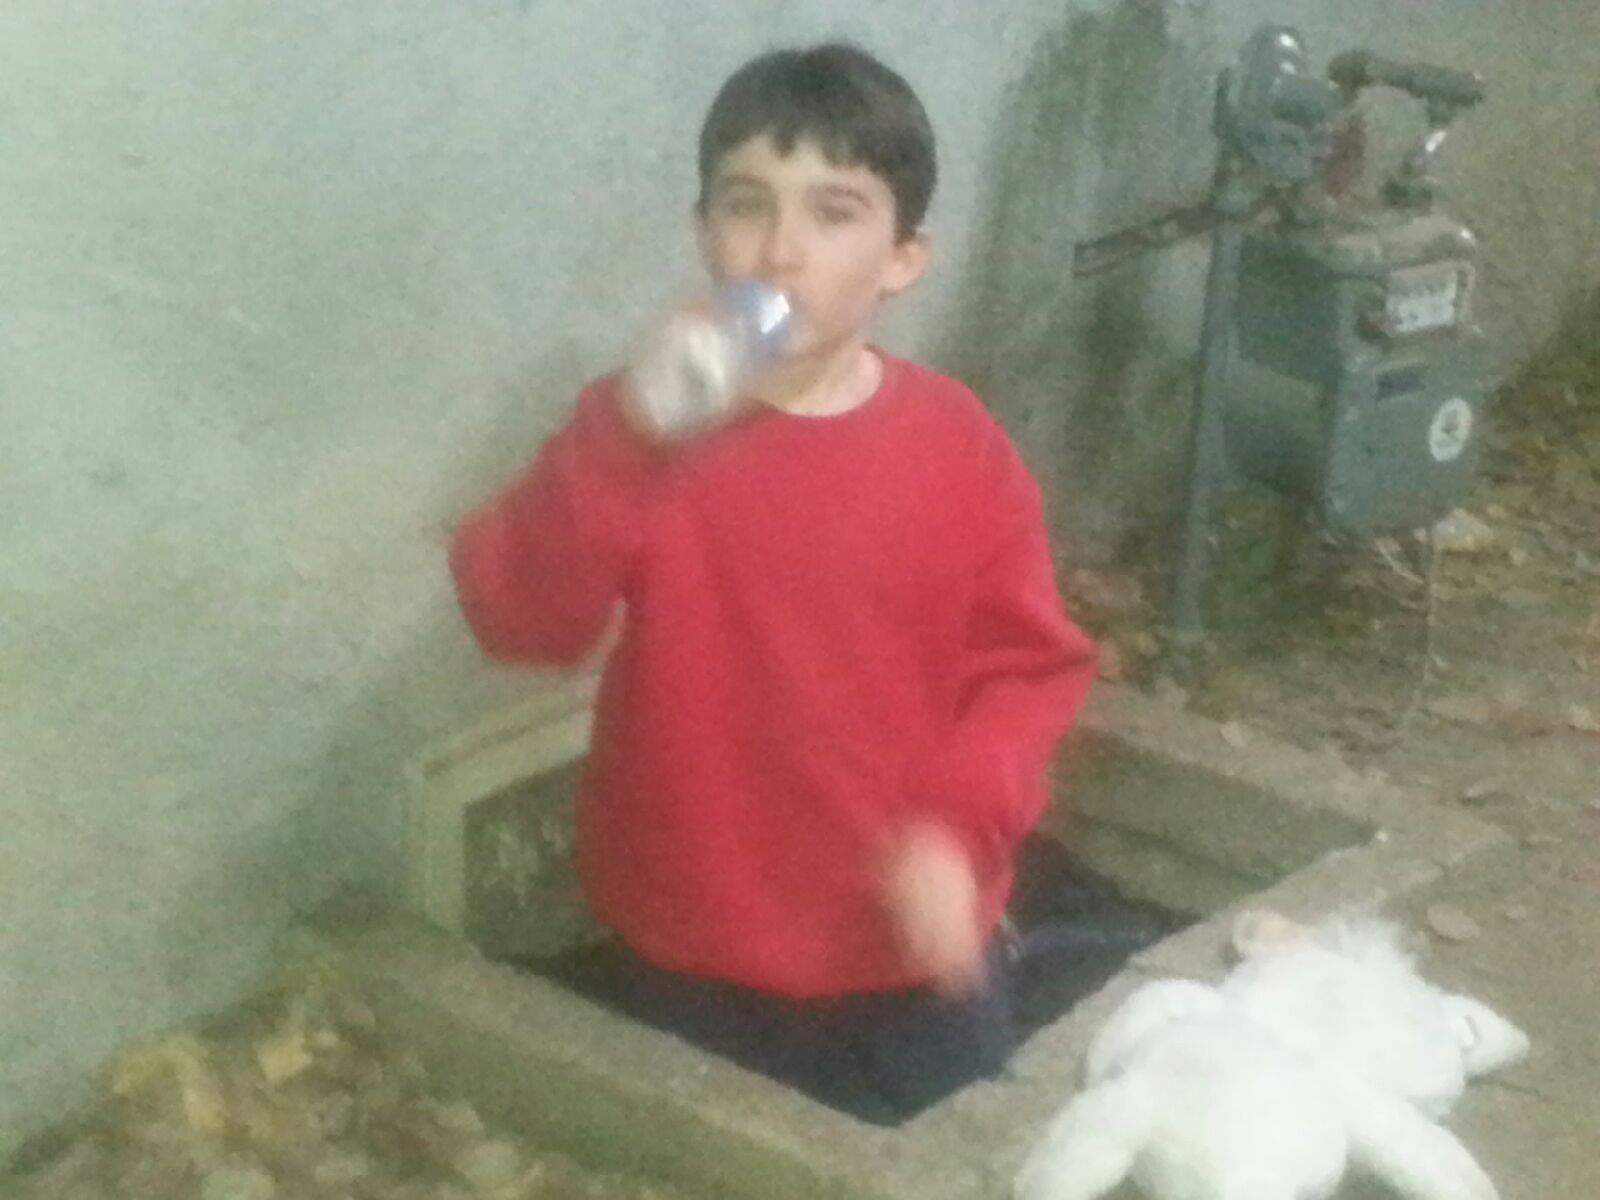 Taking a water break while filming The White Rabbit hiding from Demian